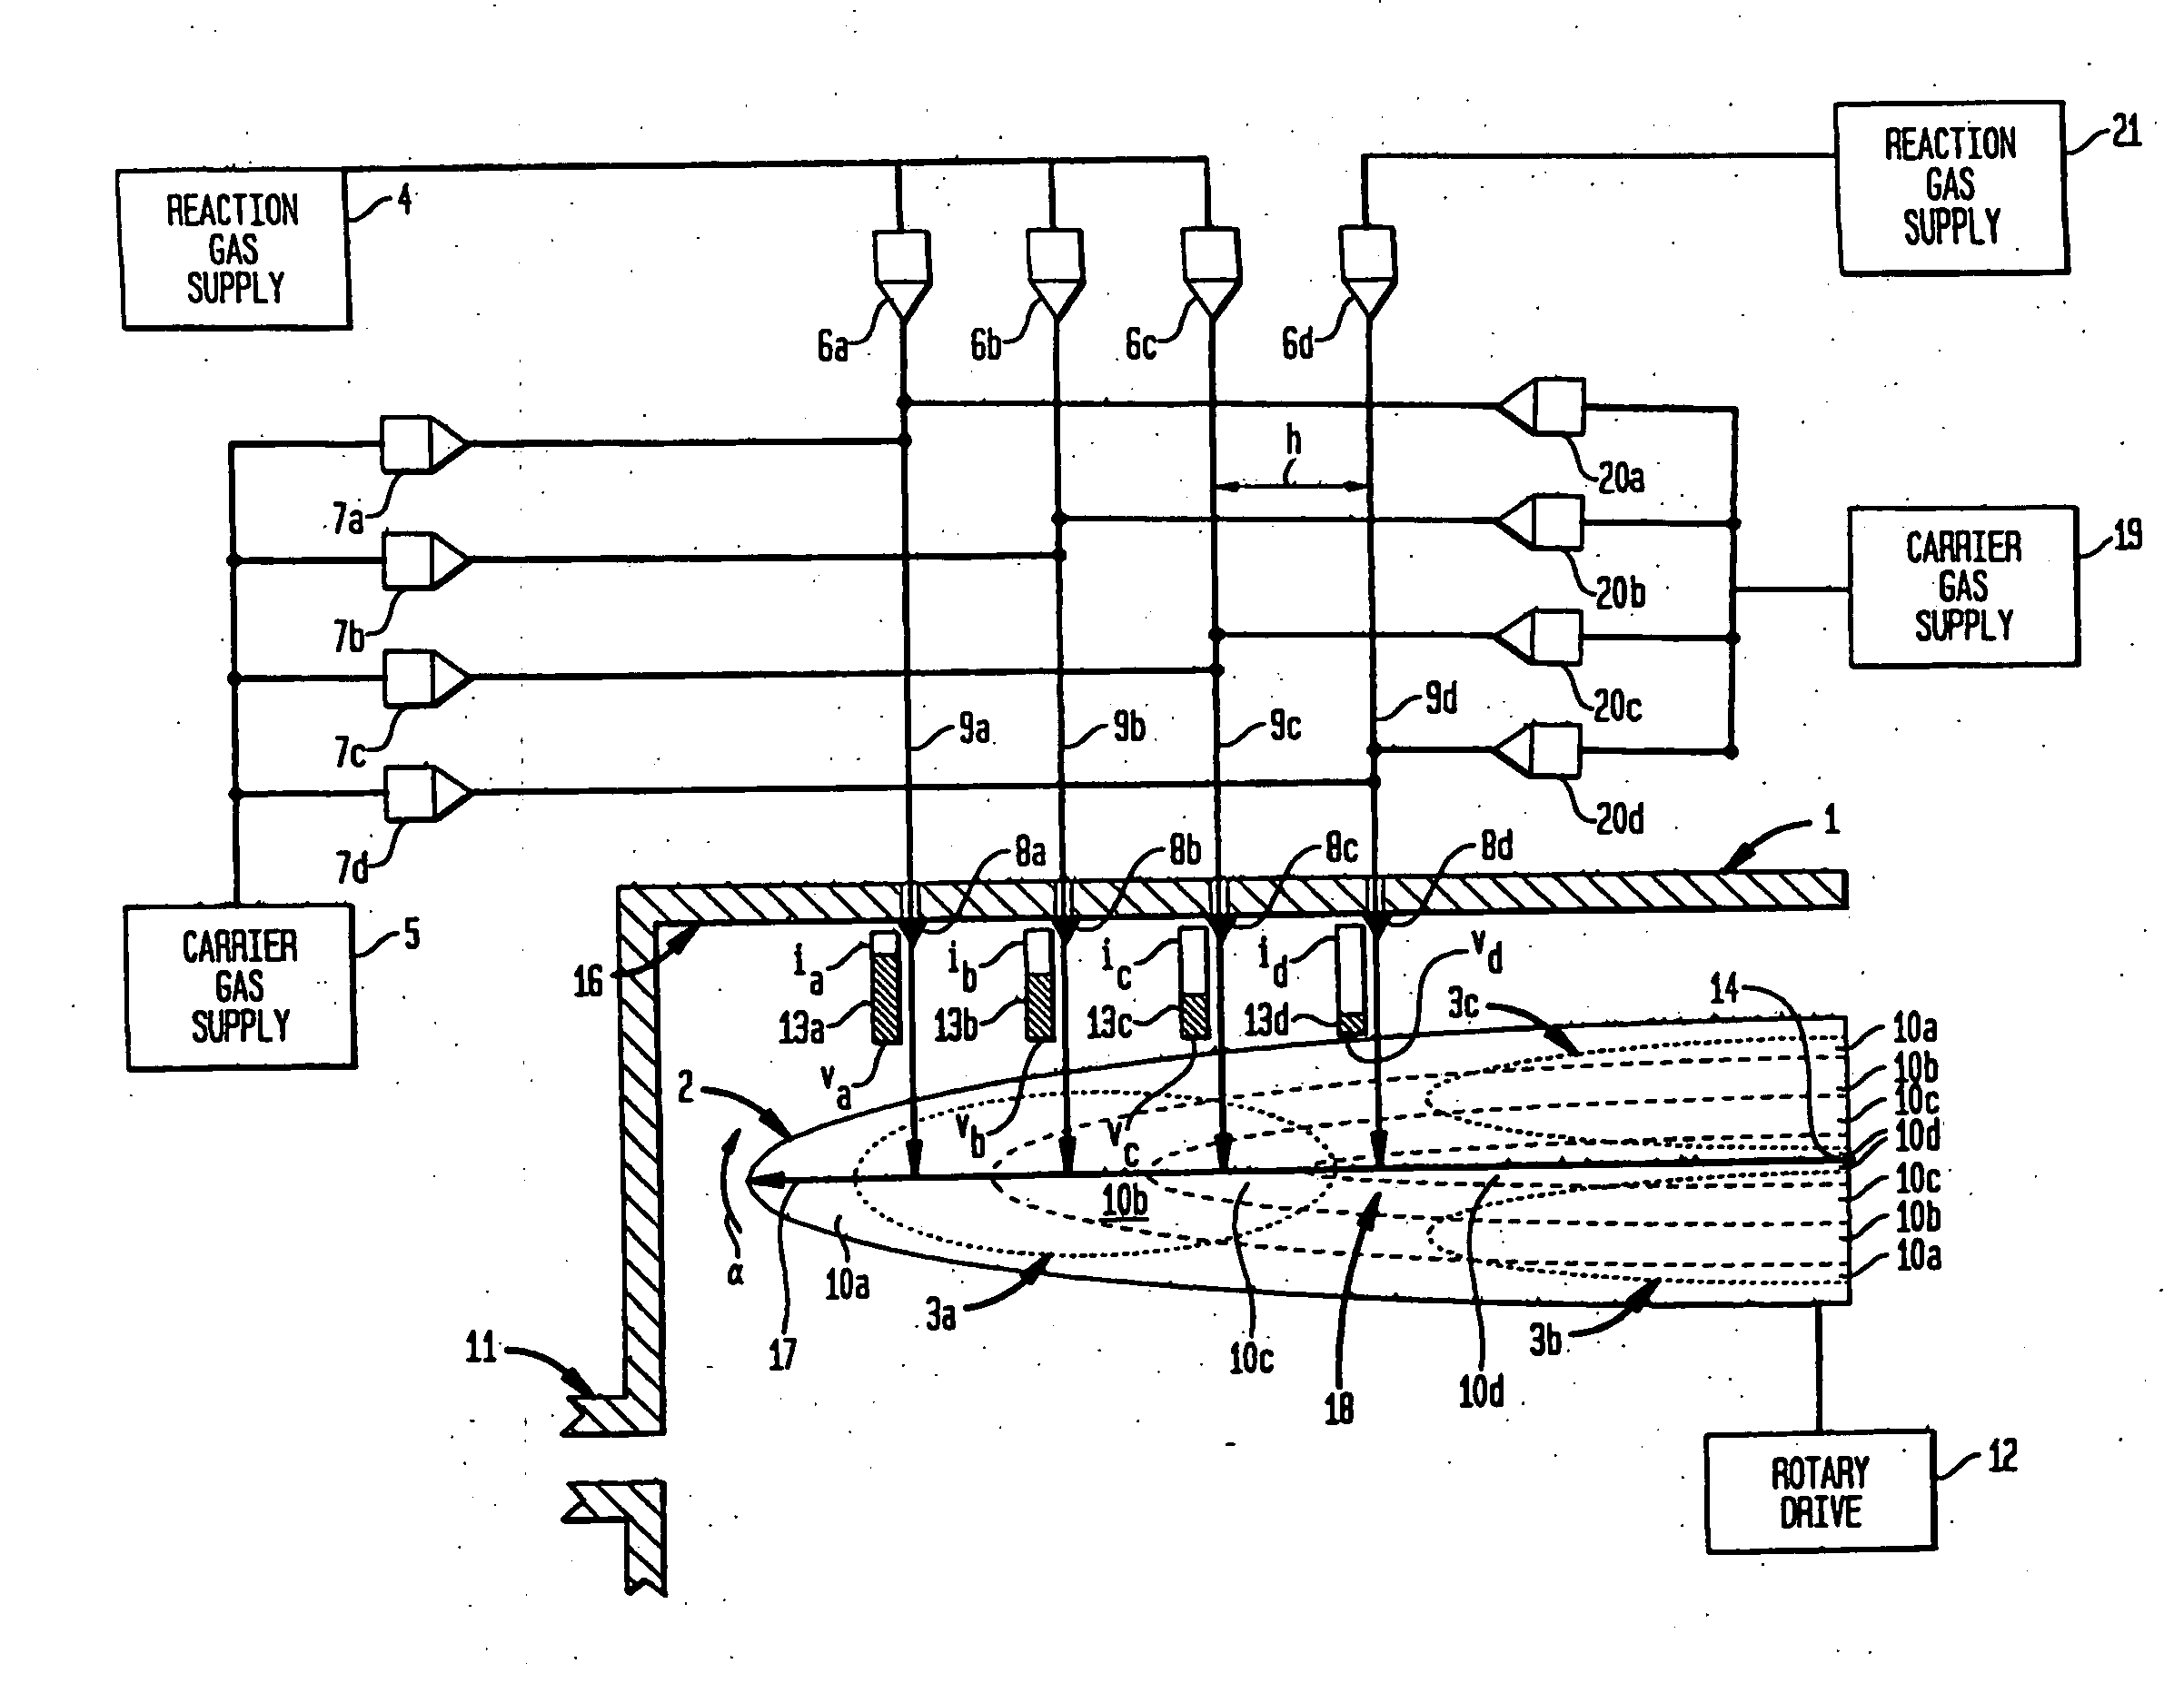 Density-matching alkyl push flow for vertical flow rotating disk reactors